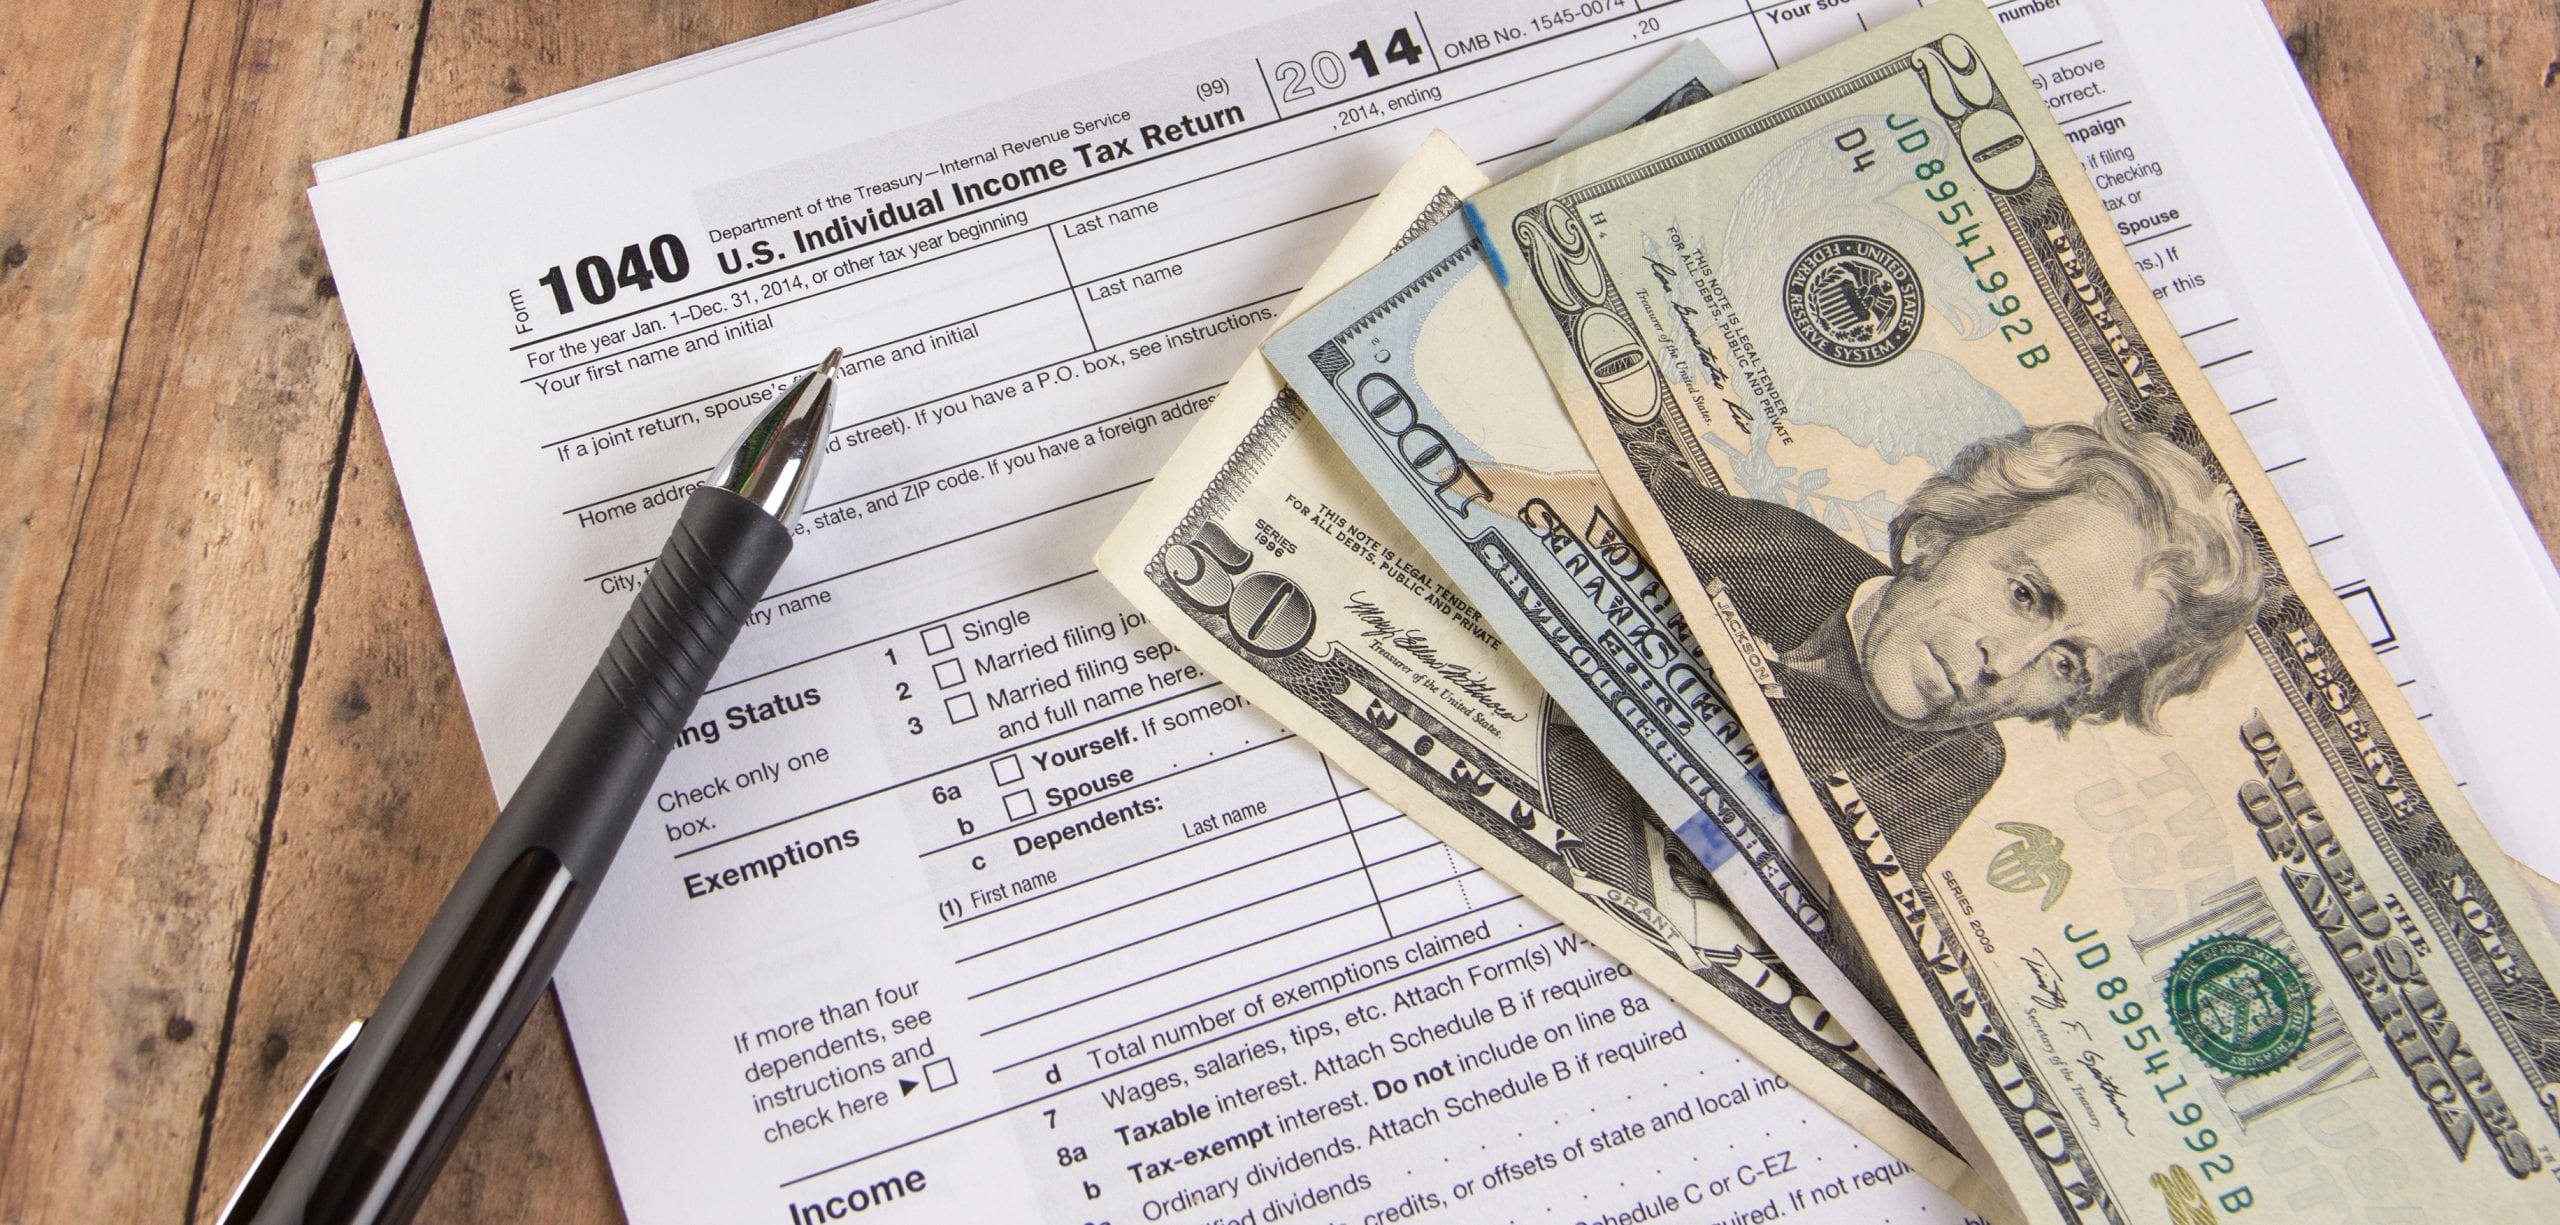 Tax Refund For 2020: How To Accurately Track The Amount Sent